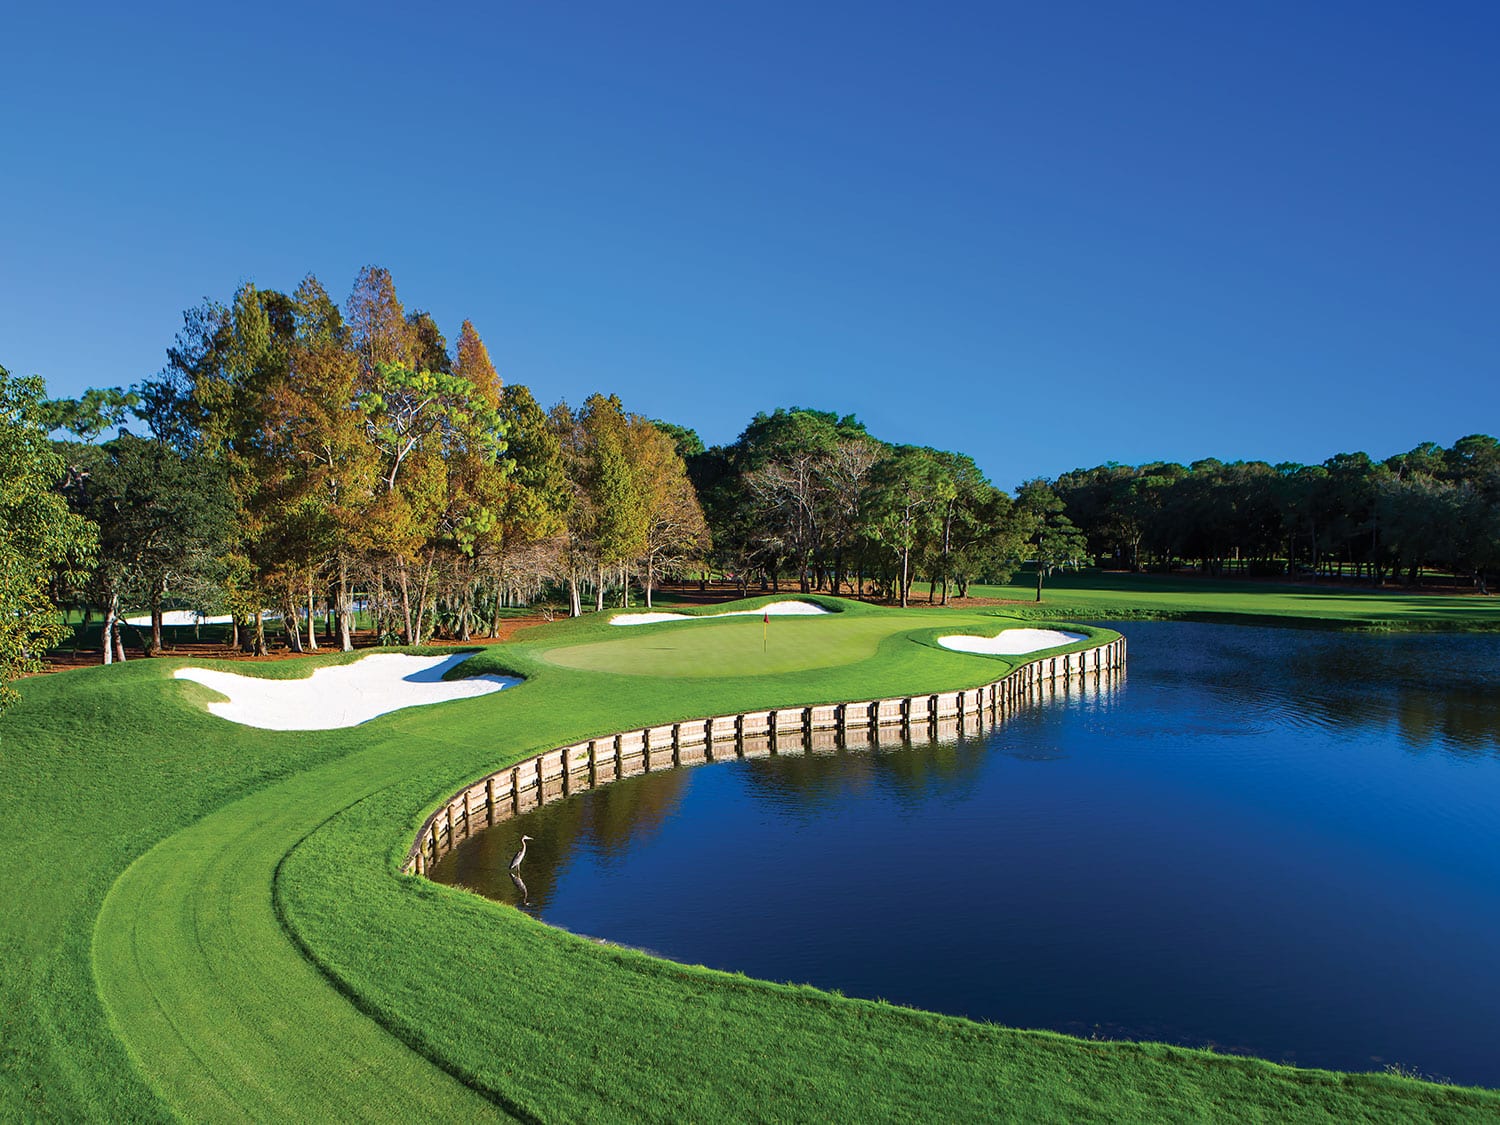 An aerial view of the 13th hole of the Copperhead Course at Innisbrook Golf Resort in Palm Harbor, Florida.